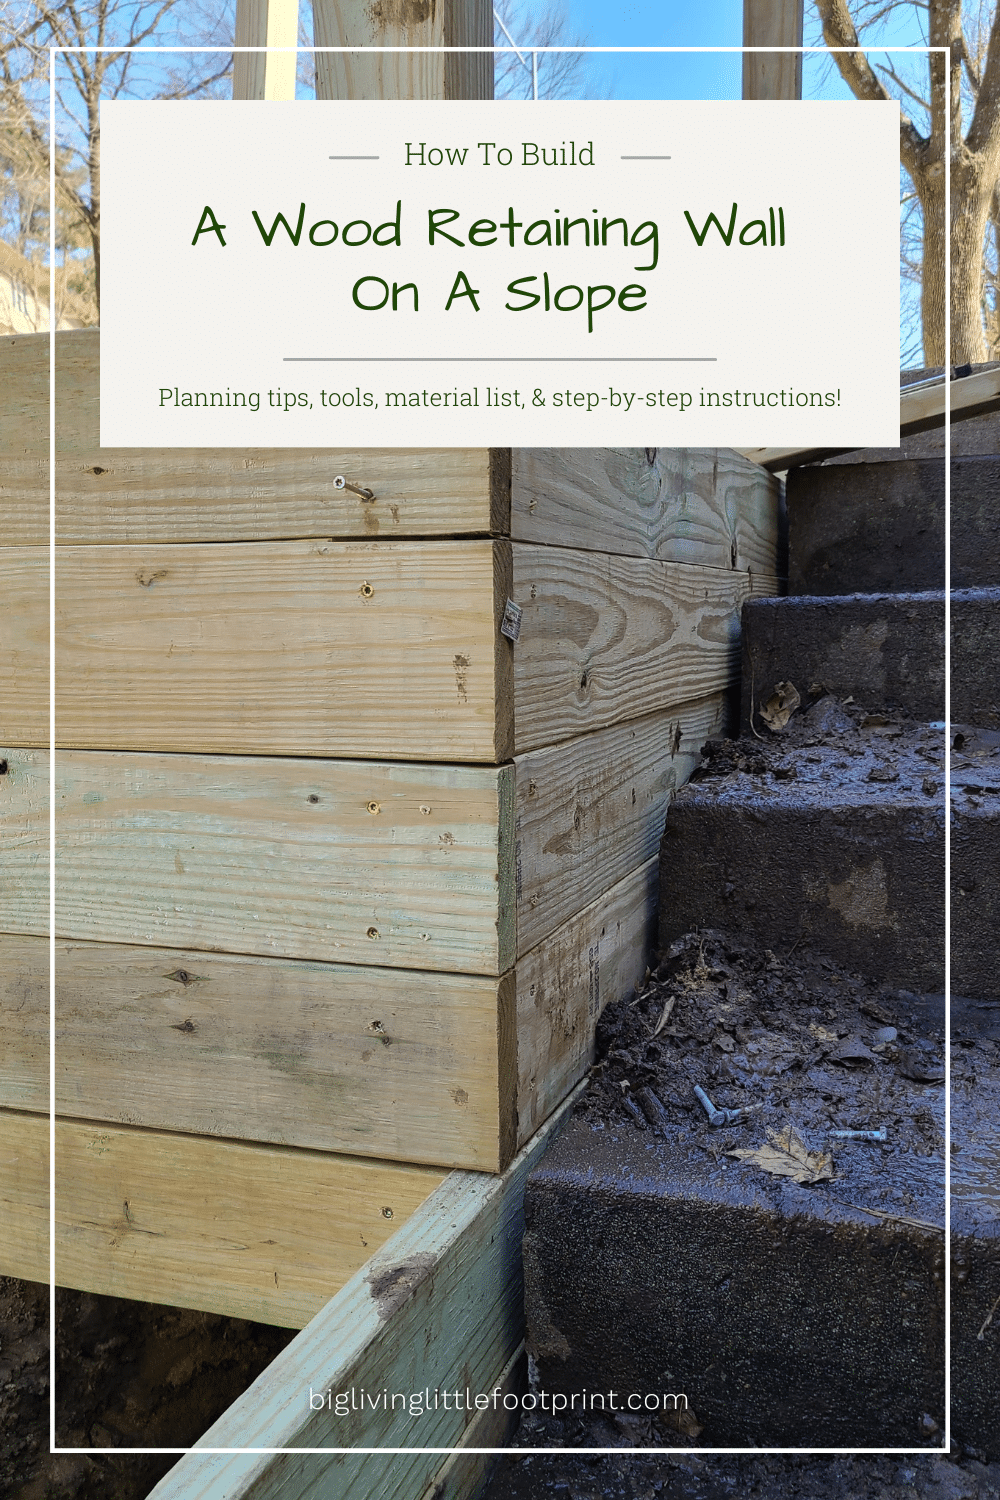 Picture of wood retaining wall on a slope beside some stairs